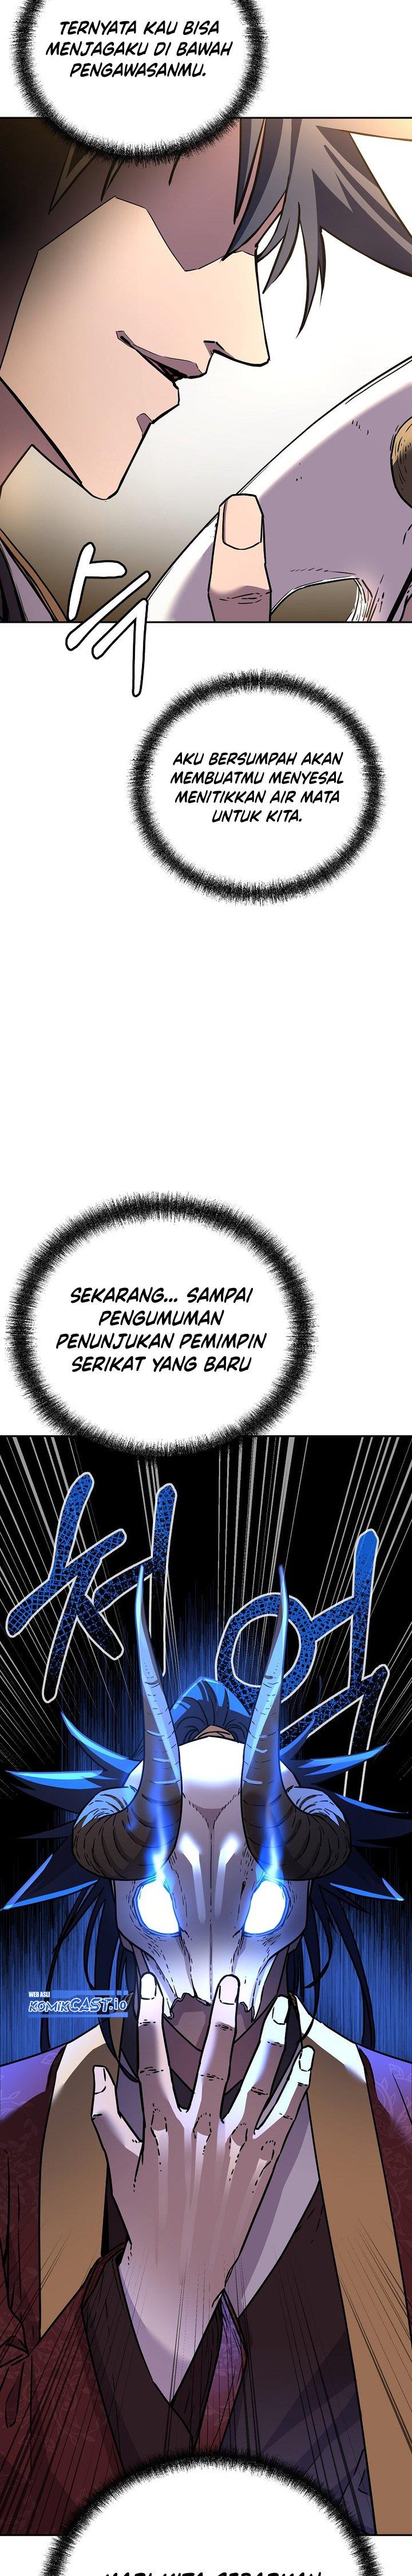 Reincarnation of the Murim Clan’s Former Ranker Chapter 90